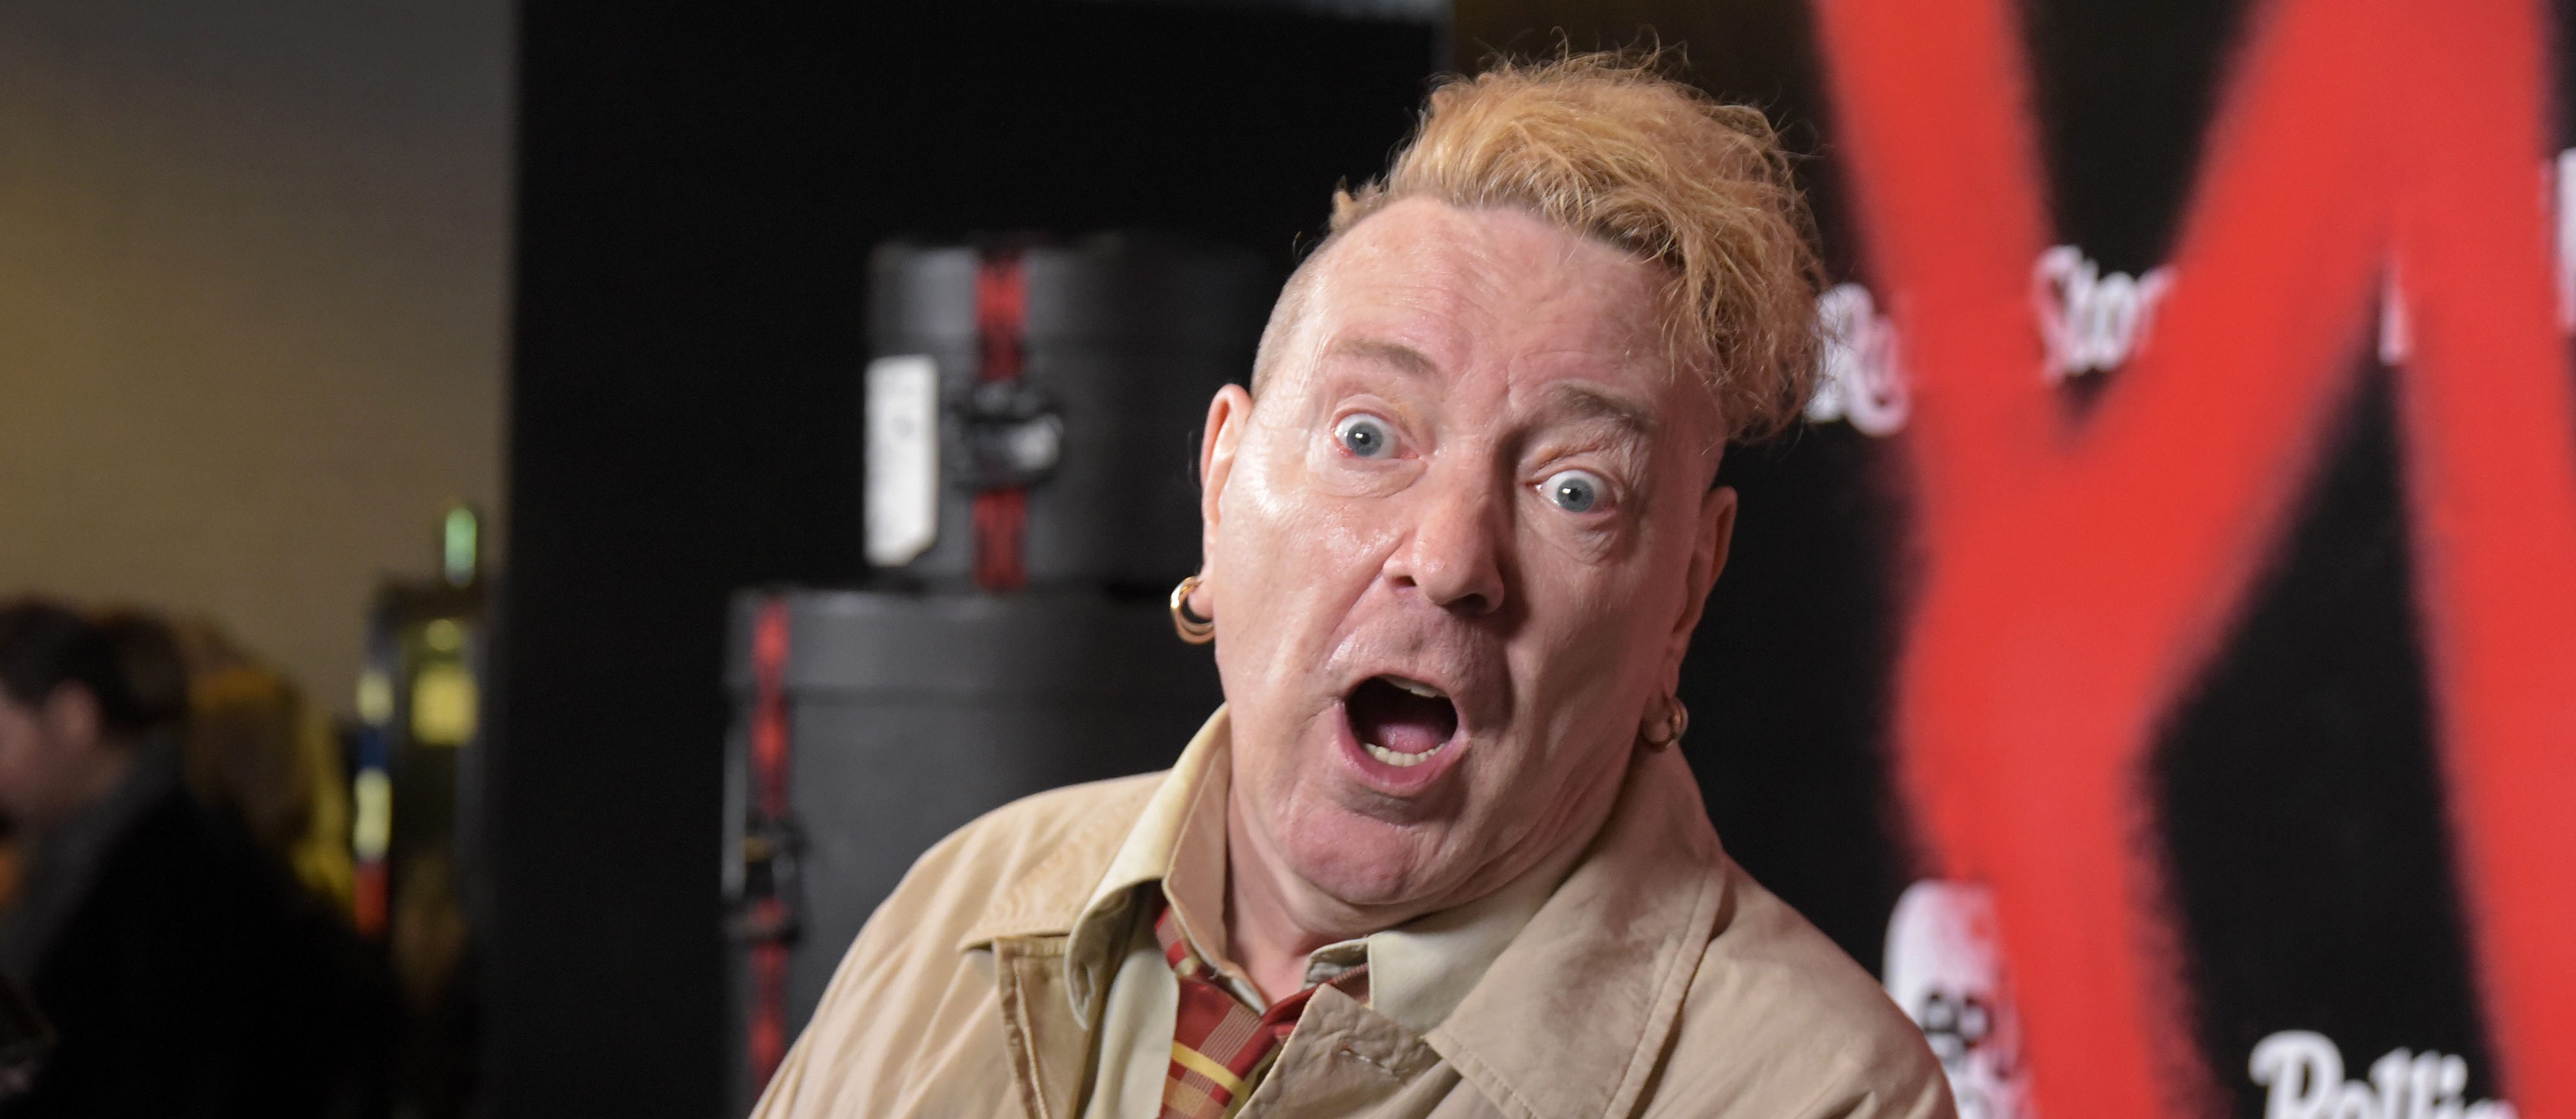 Singer John Lydon of the Sex Pistols attends the Los Angeles premiere of the EPIX Original Docu-Series "PUNK" at SIR on March 04, 2019 in Los Angeles, California. (Photo by Michael Tullberg/FilmMagic)